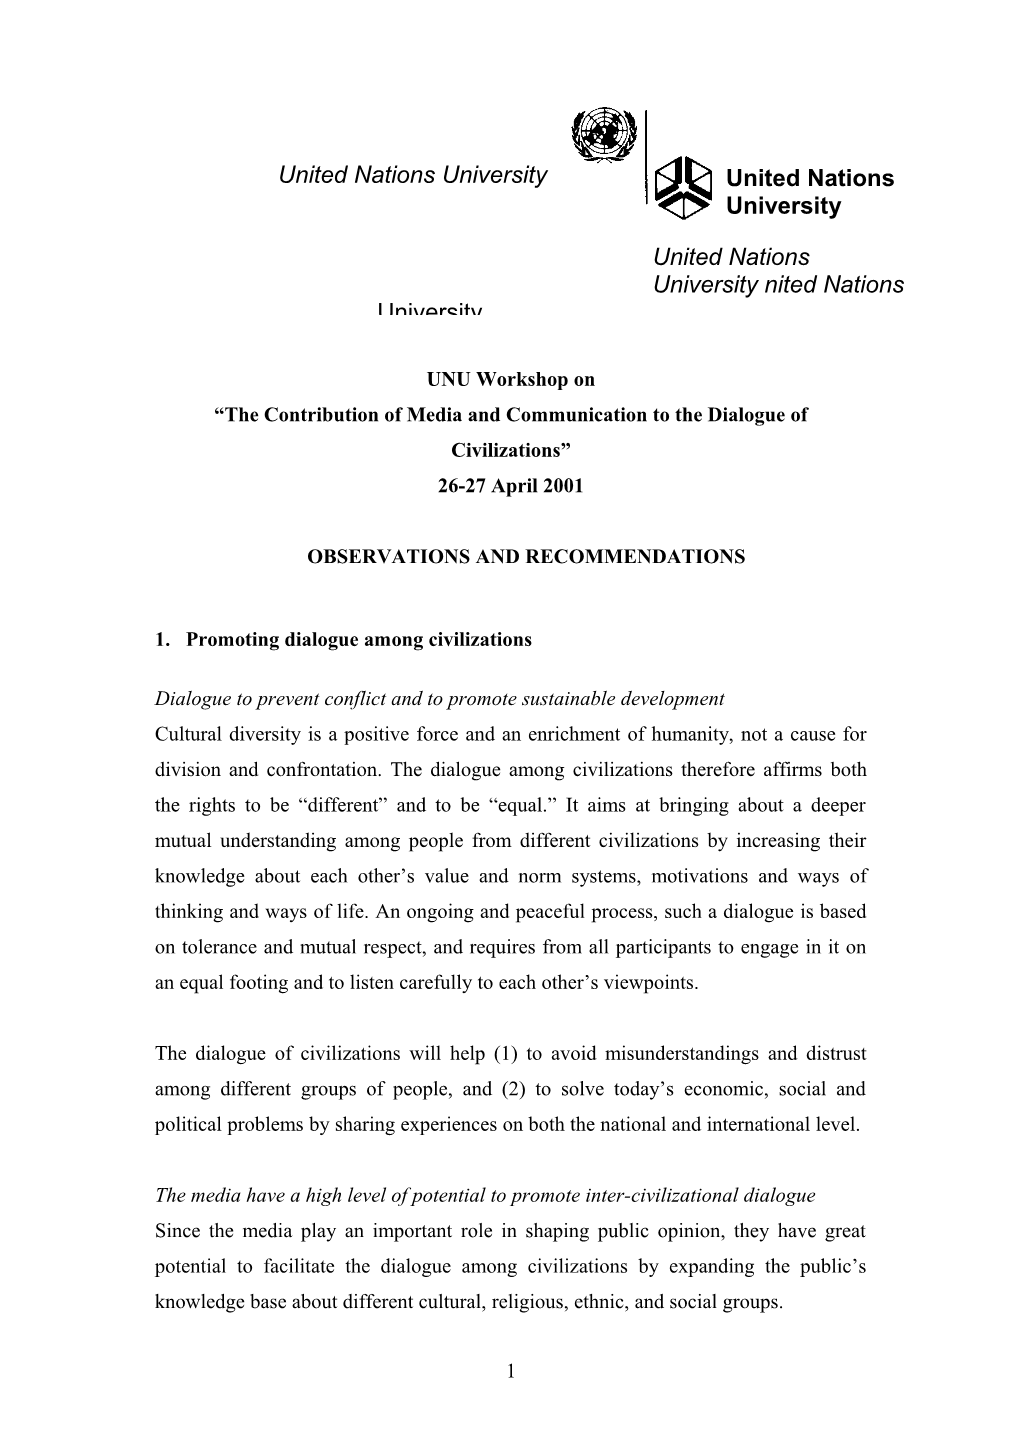 The Contribution of Media and Communication to the Dialogue of Civilizations